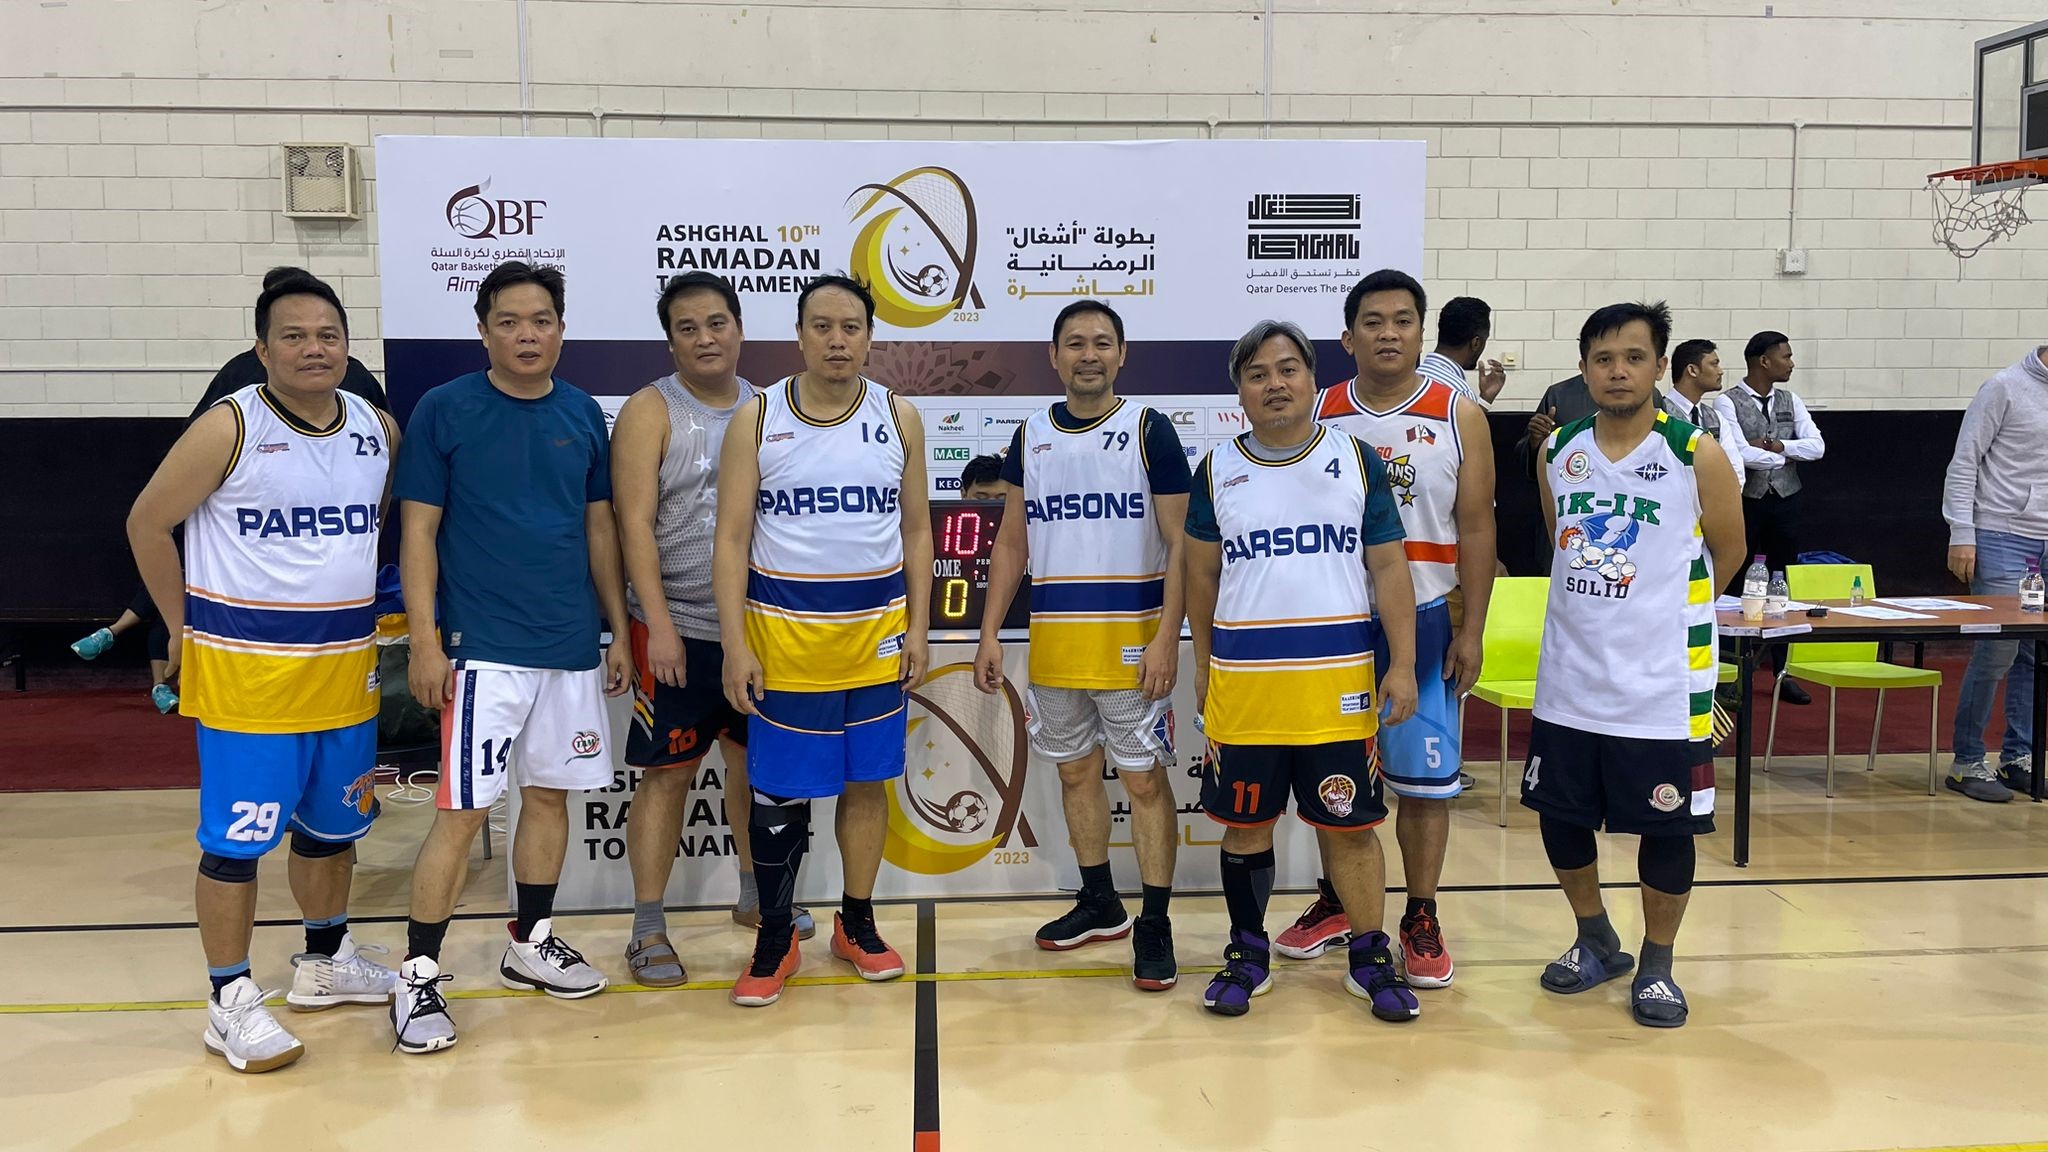 Our Qatar Basketball Team gathers for a photo after a match up with other local teams.  